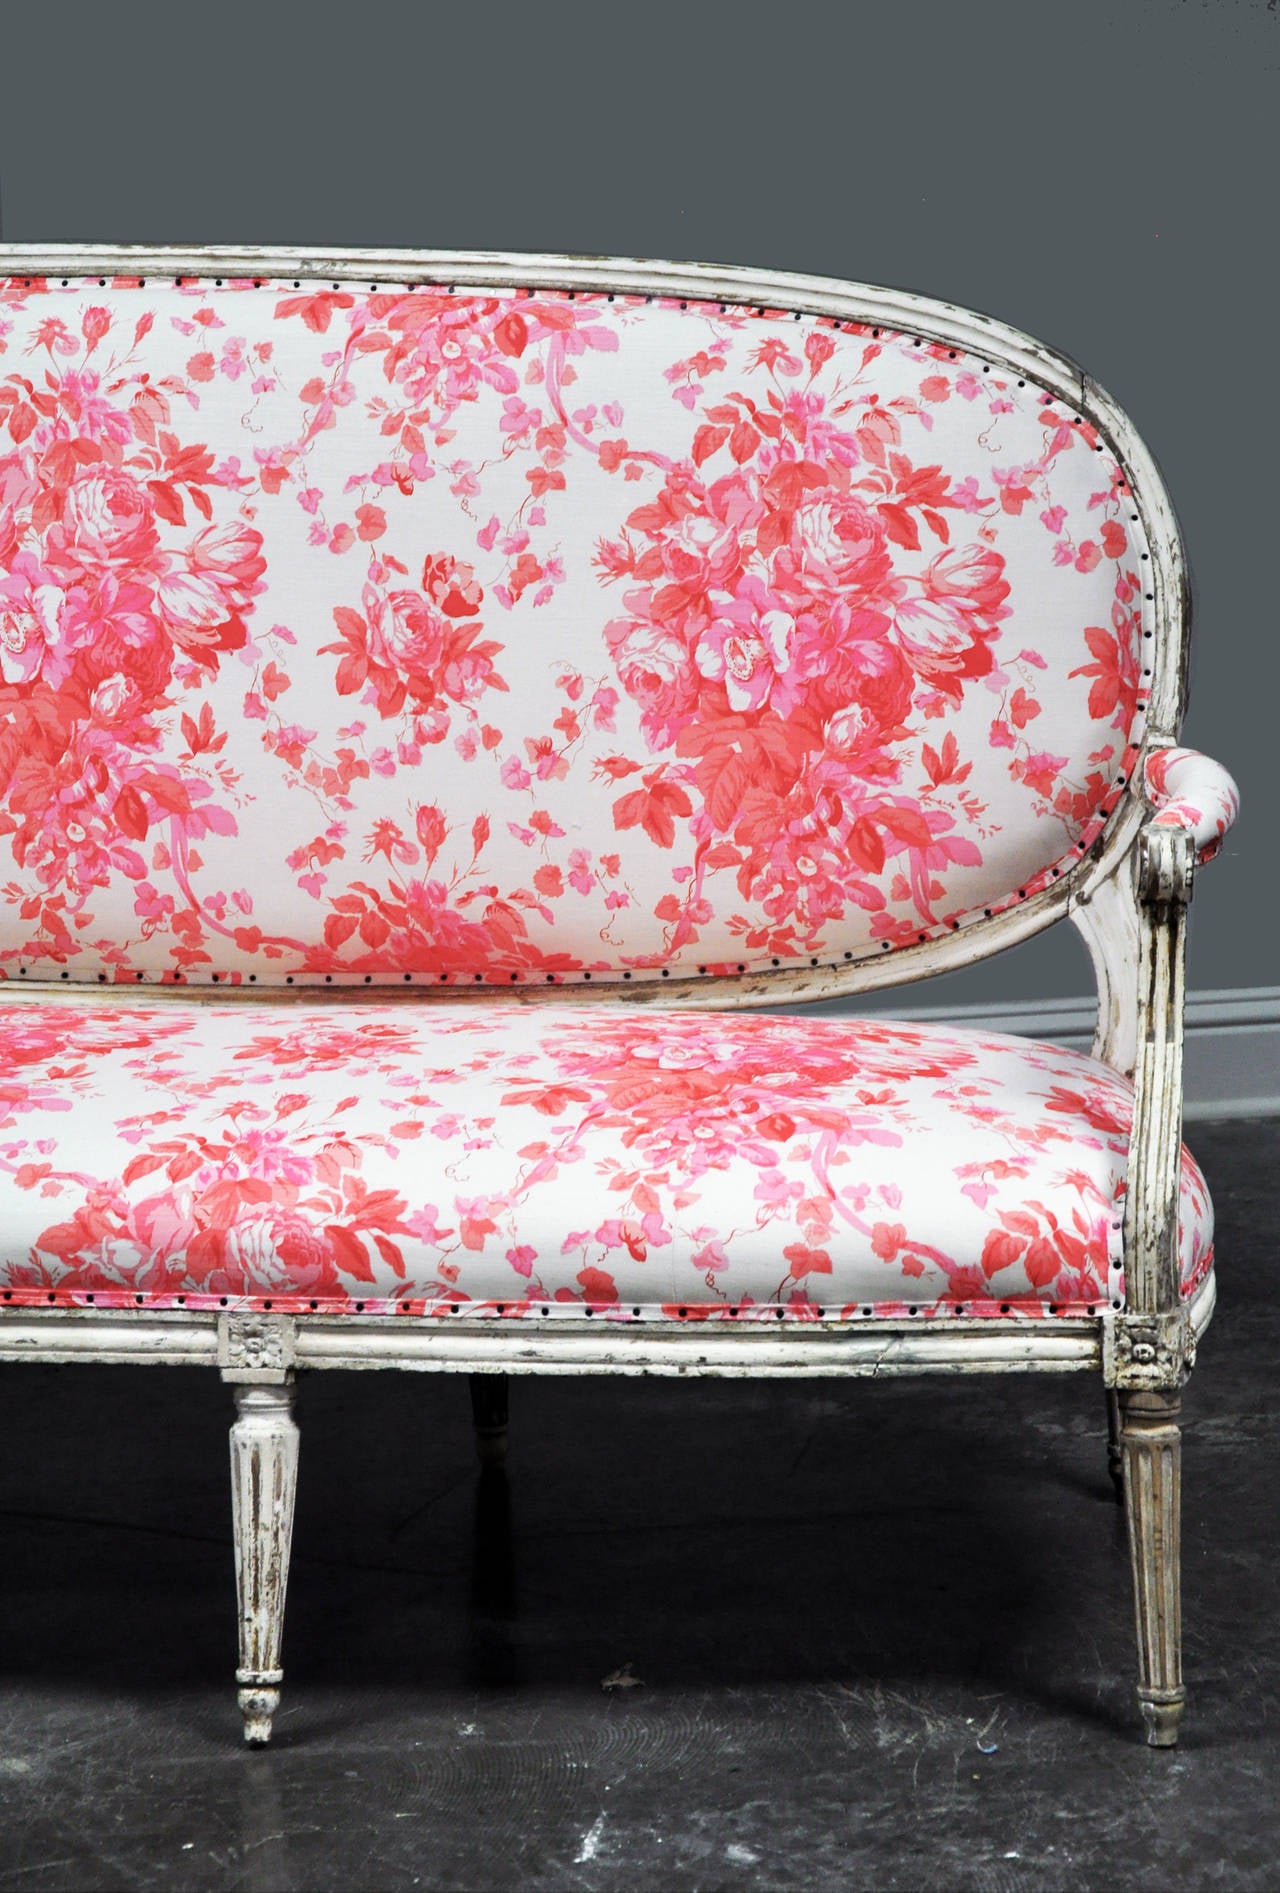 Old painted finish, newly upholstered in Bennison 'Roses - Shocking Pink in Oyster' as seen in Milieu Magazine's Summer 2015 issue.

Established in 1979, Joyce Horn Antiques, ltd. continues its 36 year tradition of being a family owned and